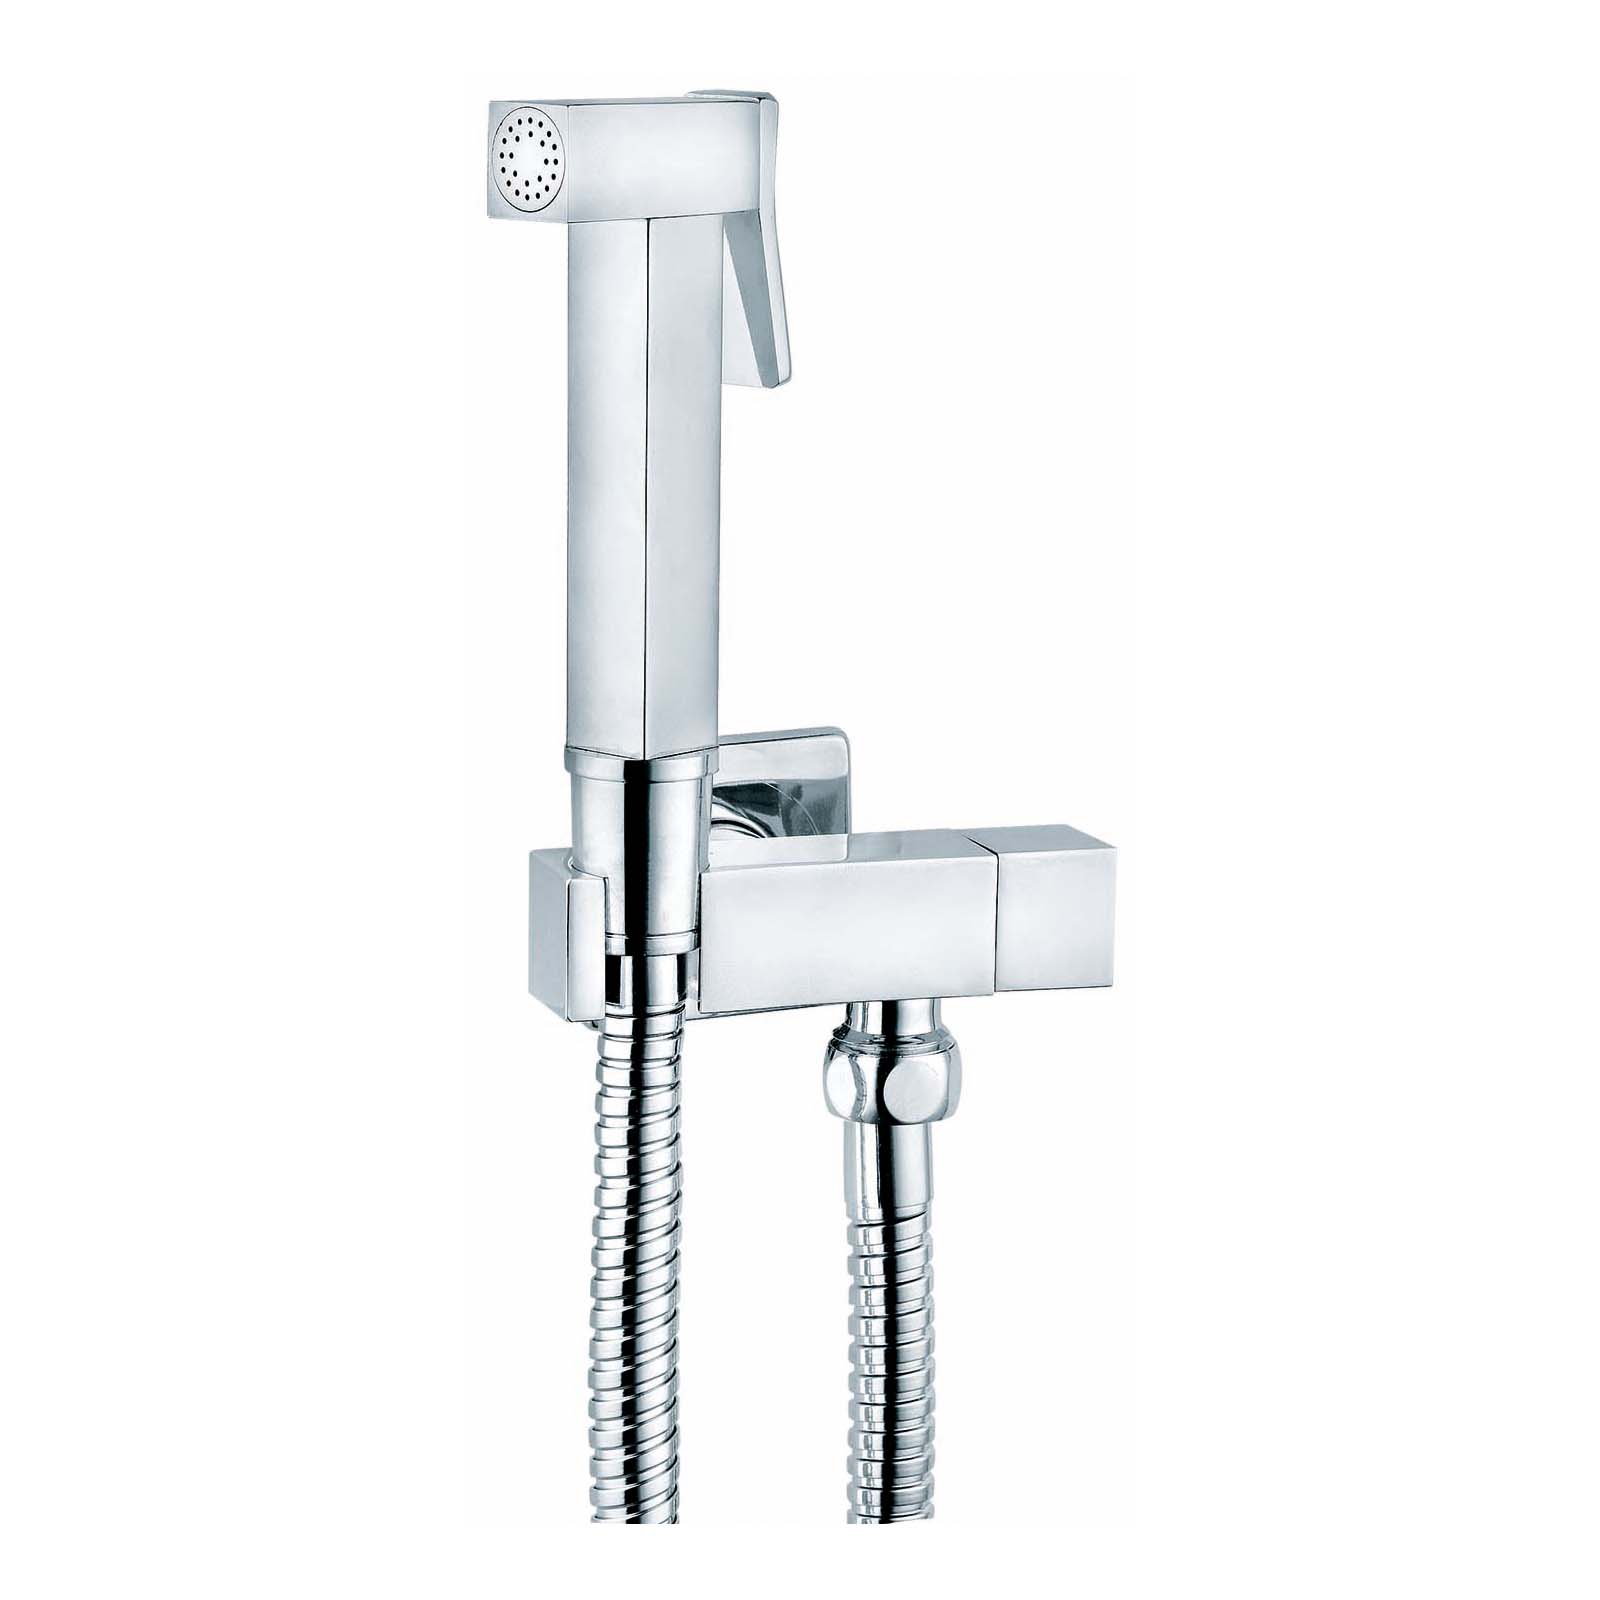 Hydrobrush kit complete with brass shower, 120 cm flexible hose and faucet